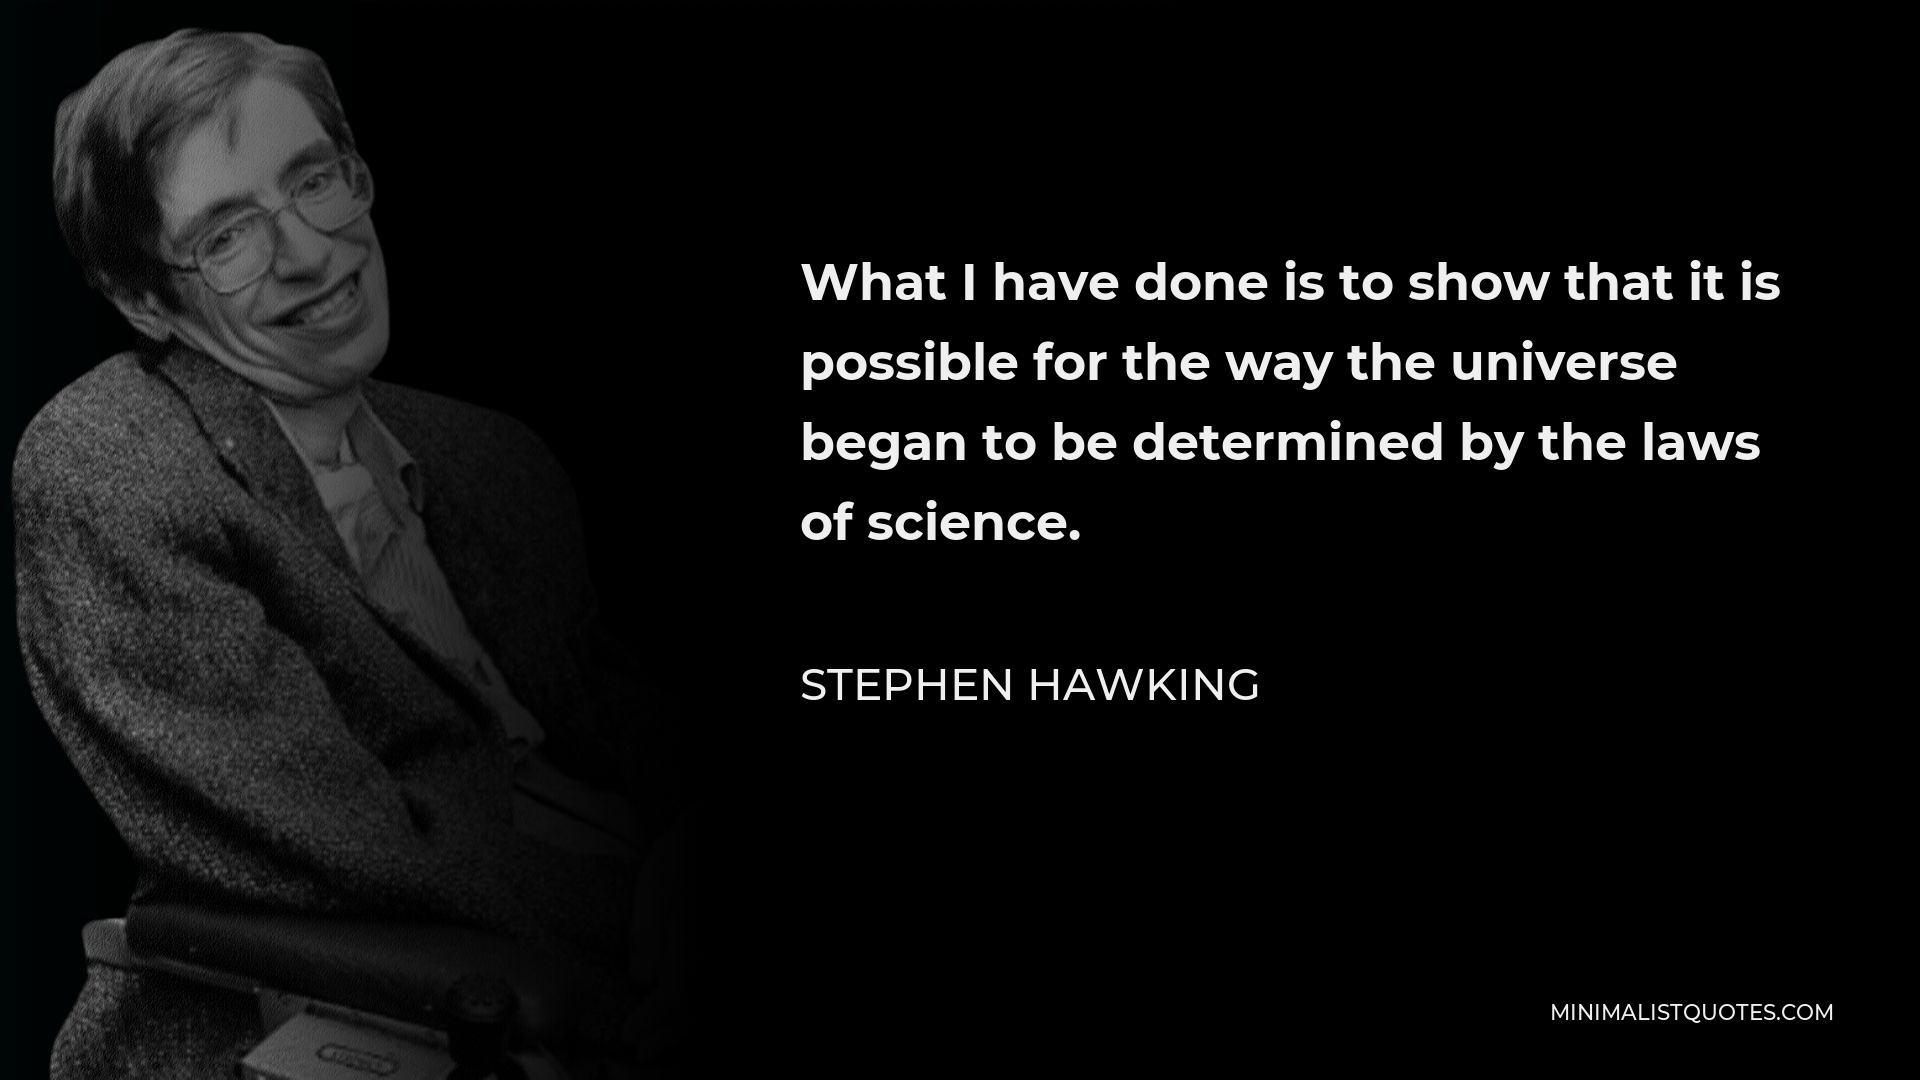 Stephen Hawking Quote - What I have done is to show that it is possible for the way the universe began to be determined by the laws of science.